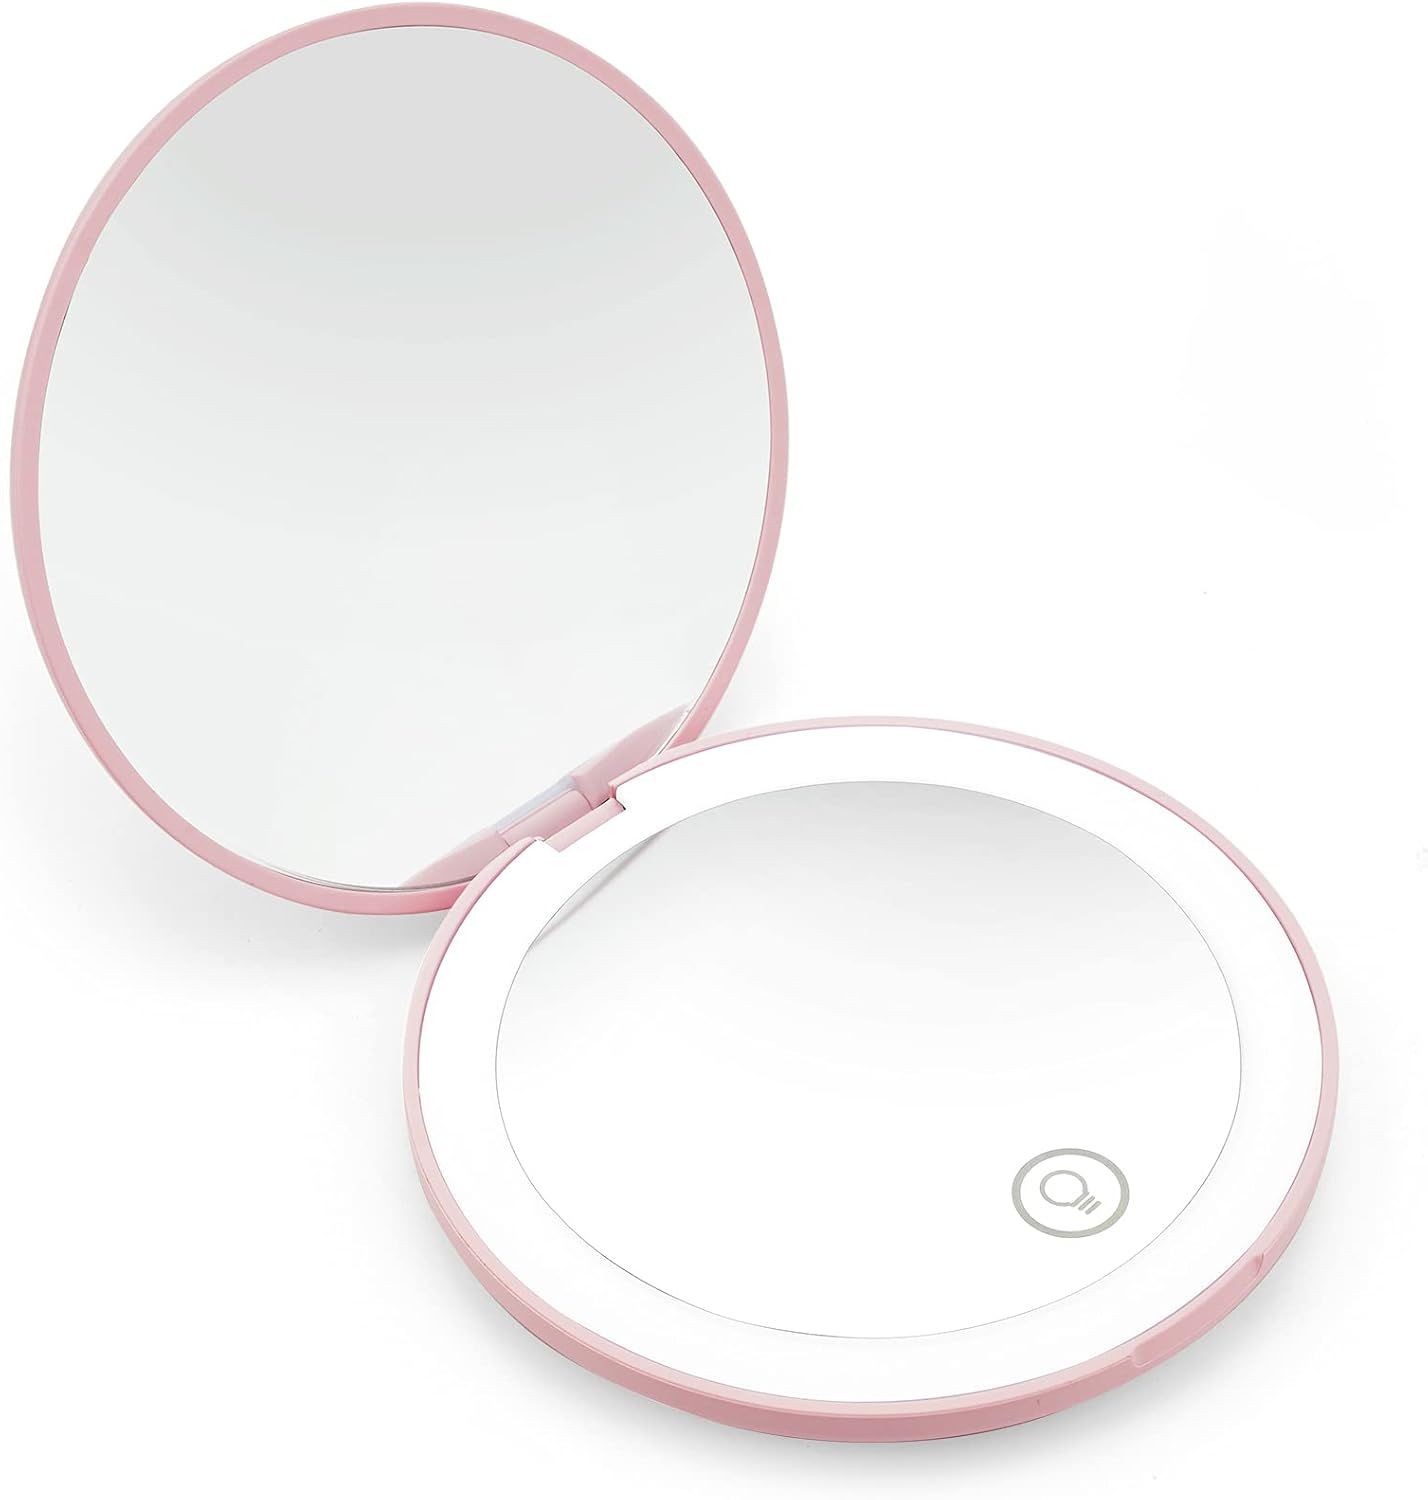 JRKJ LED Compact Mirror,10X Magnifying Travel Makeup Mirror,3.5 inch,Portable for Purse and Pocke... | Amazon (US)